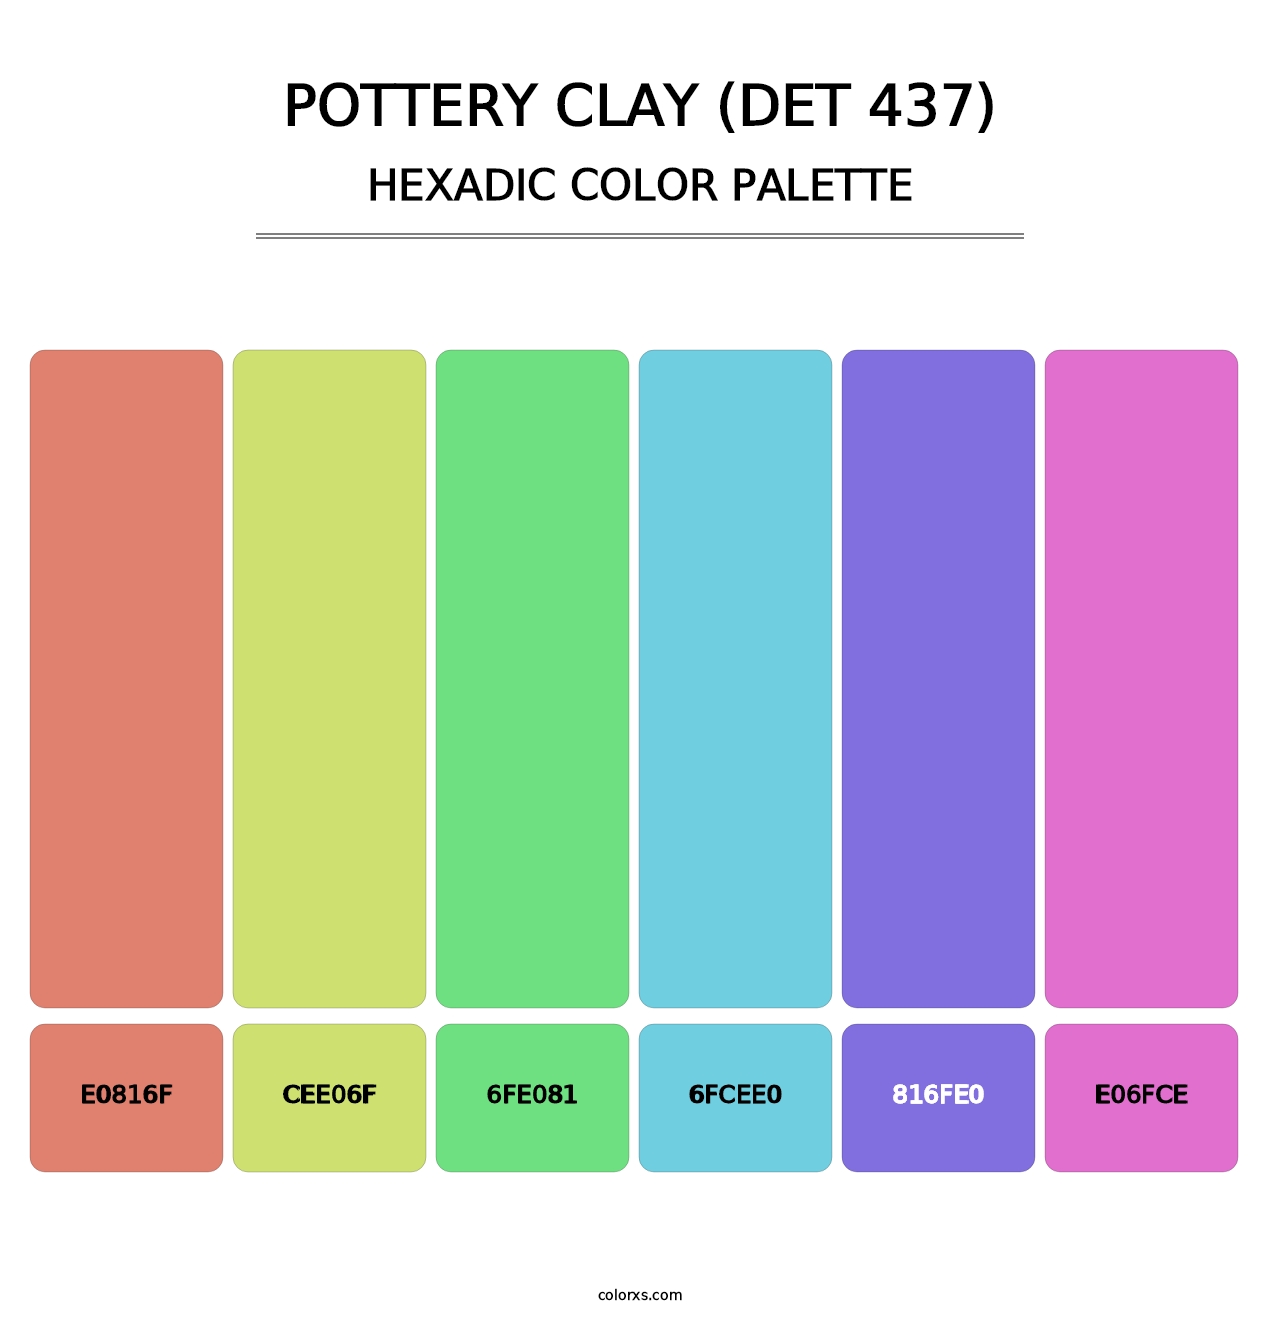 Pottery Clay (DET 437) - Hexadic Color Palette